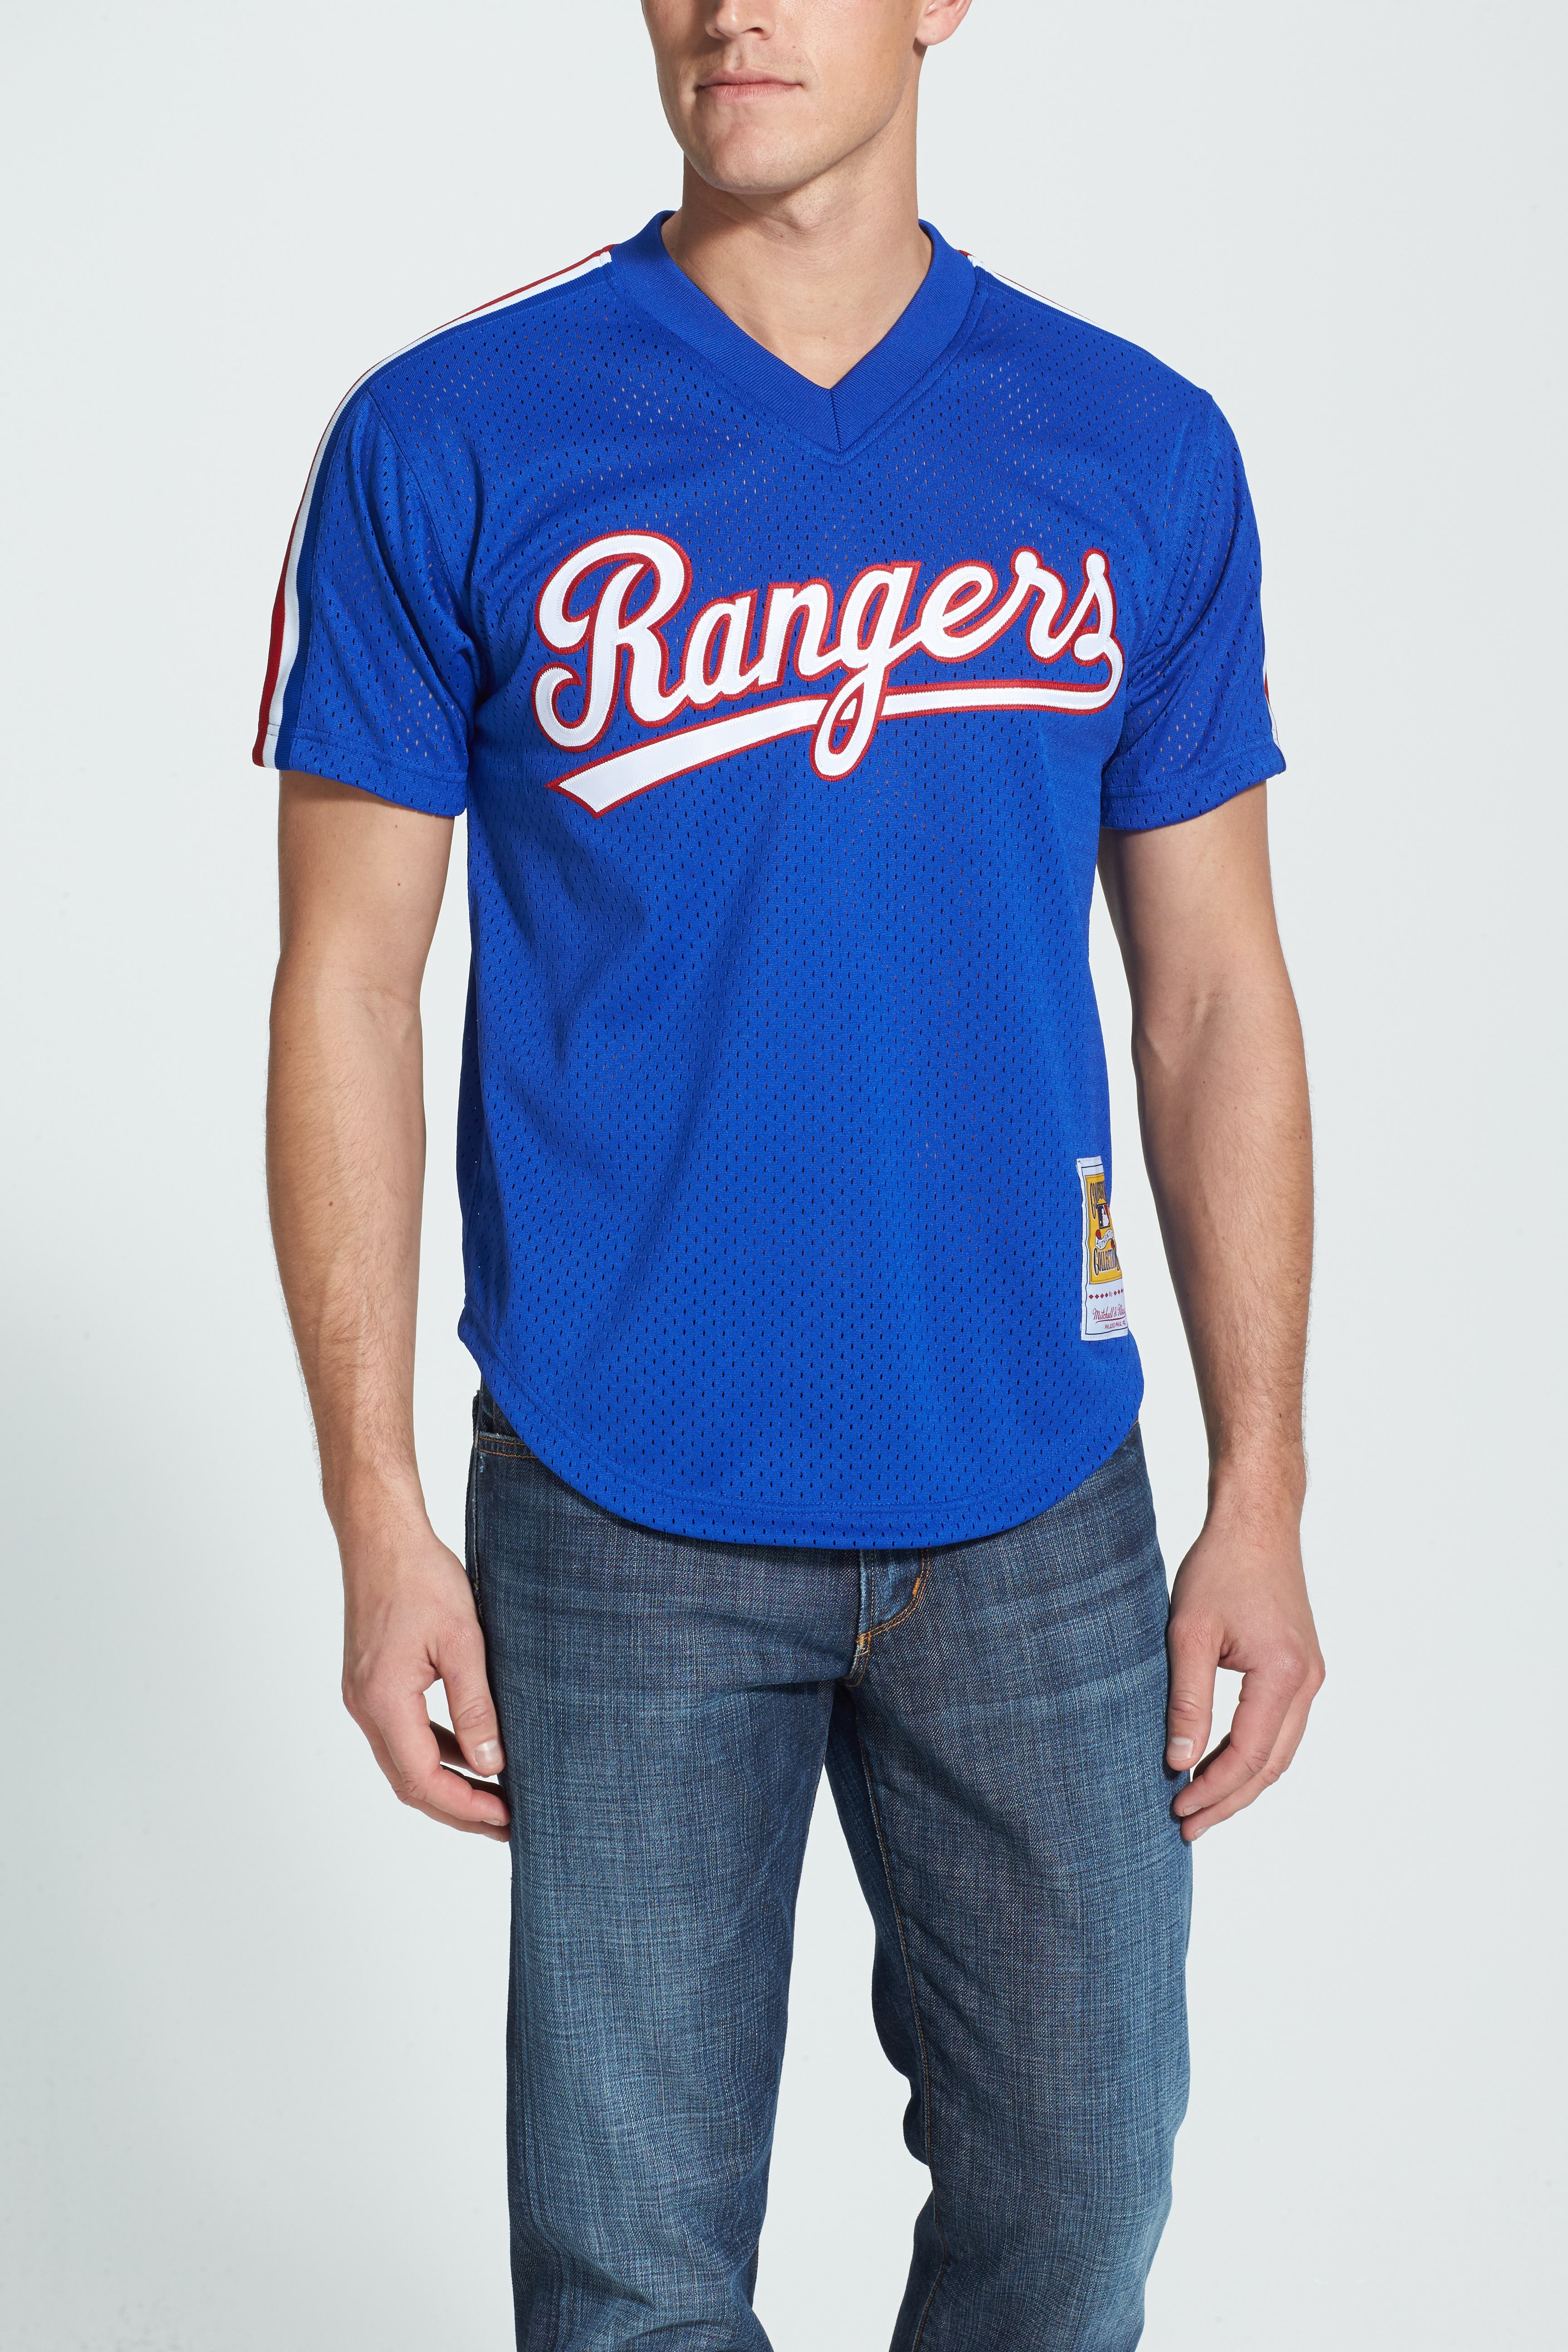 mitchell and ness texas rangers